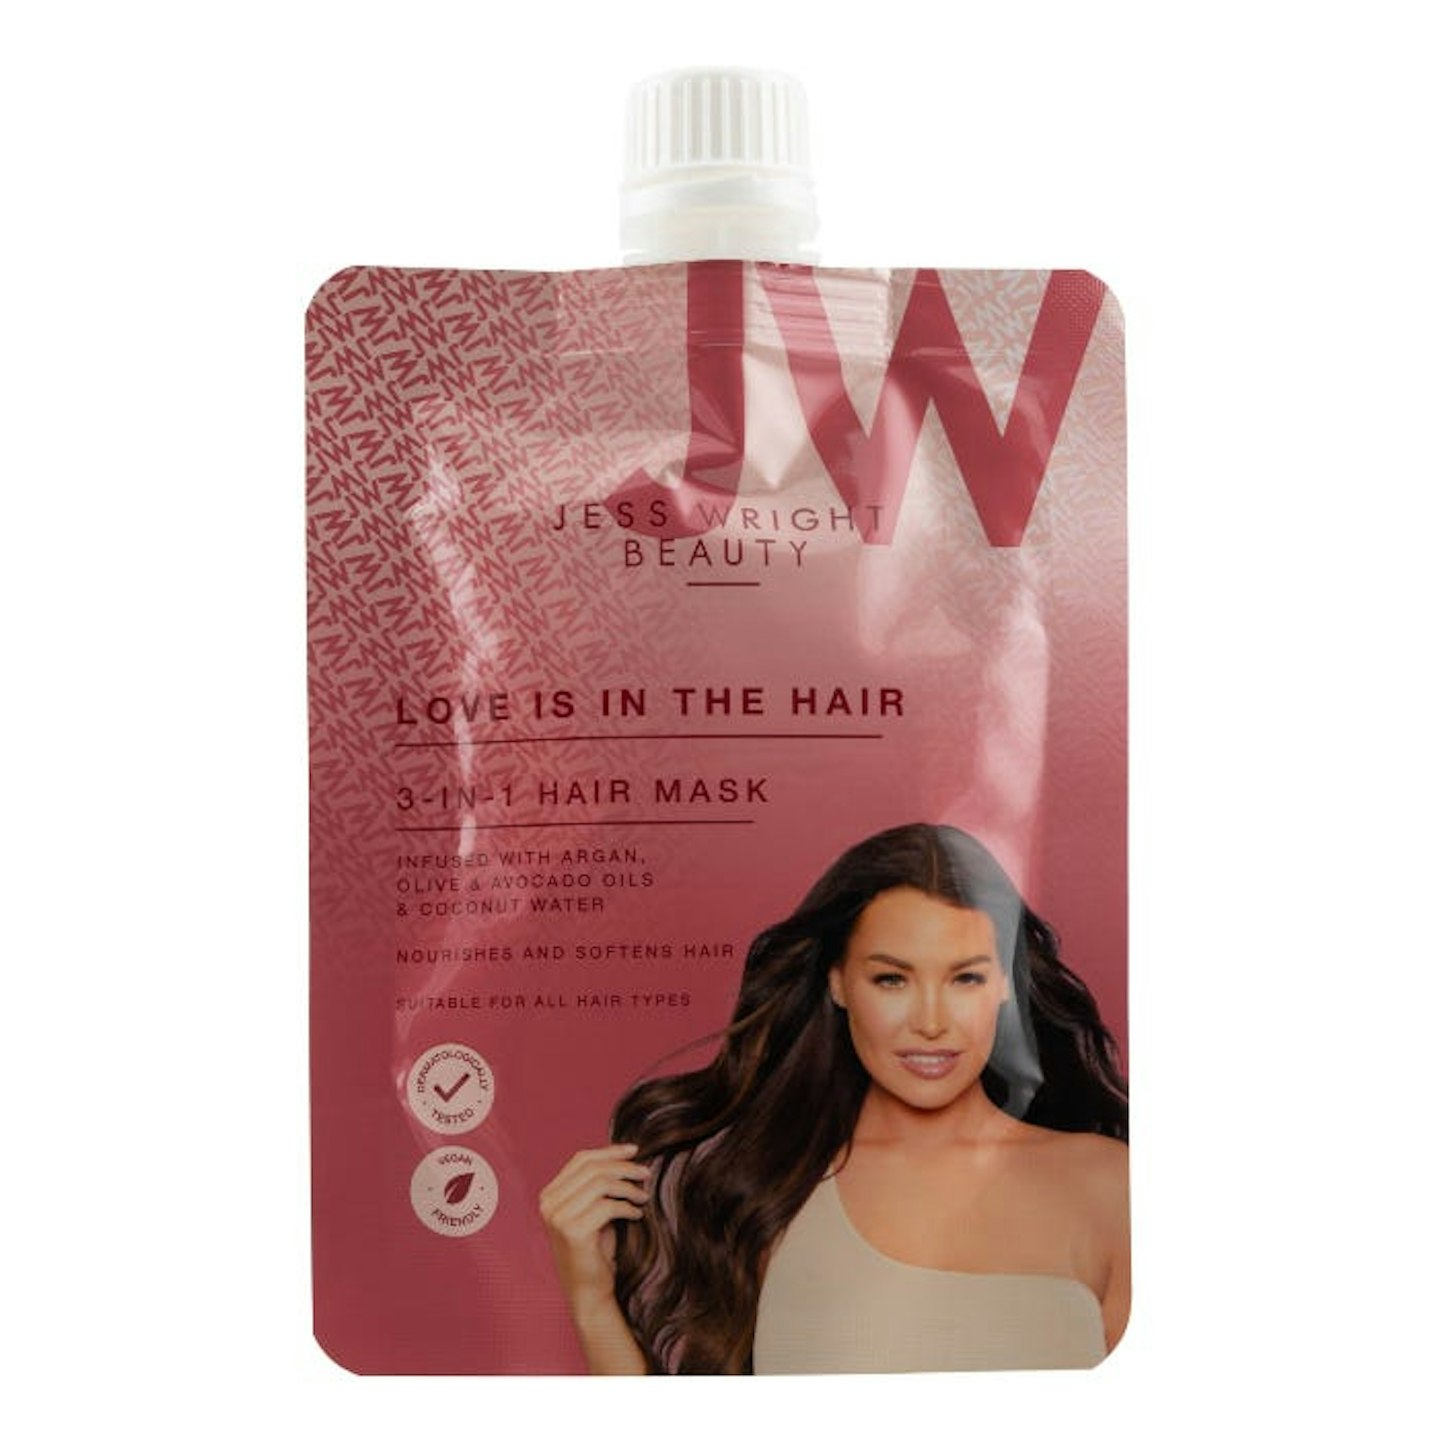 Jess Wright Love Is In The Hair 3-In-1 Hair Mask